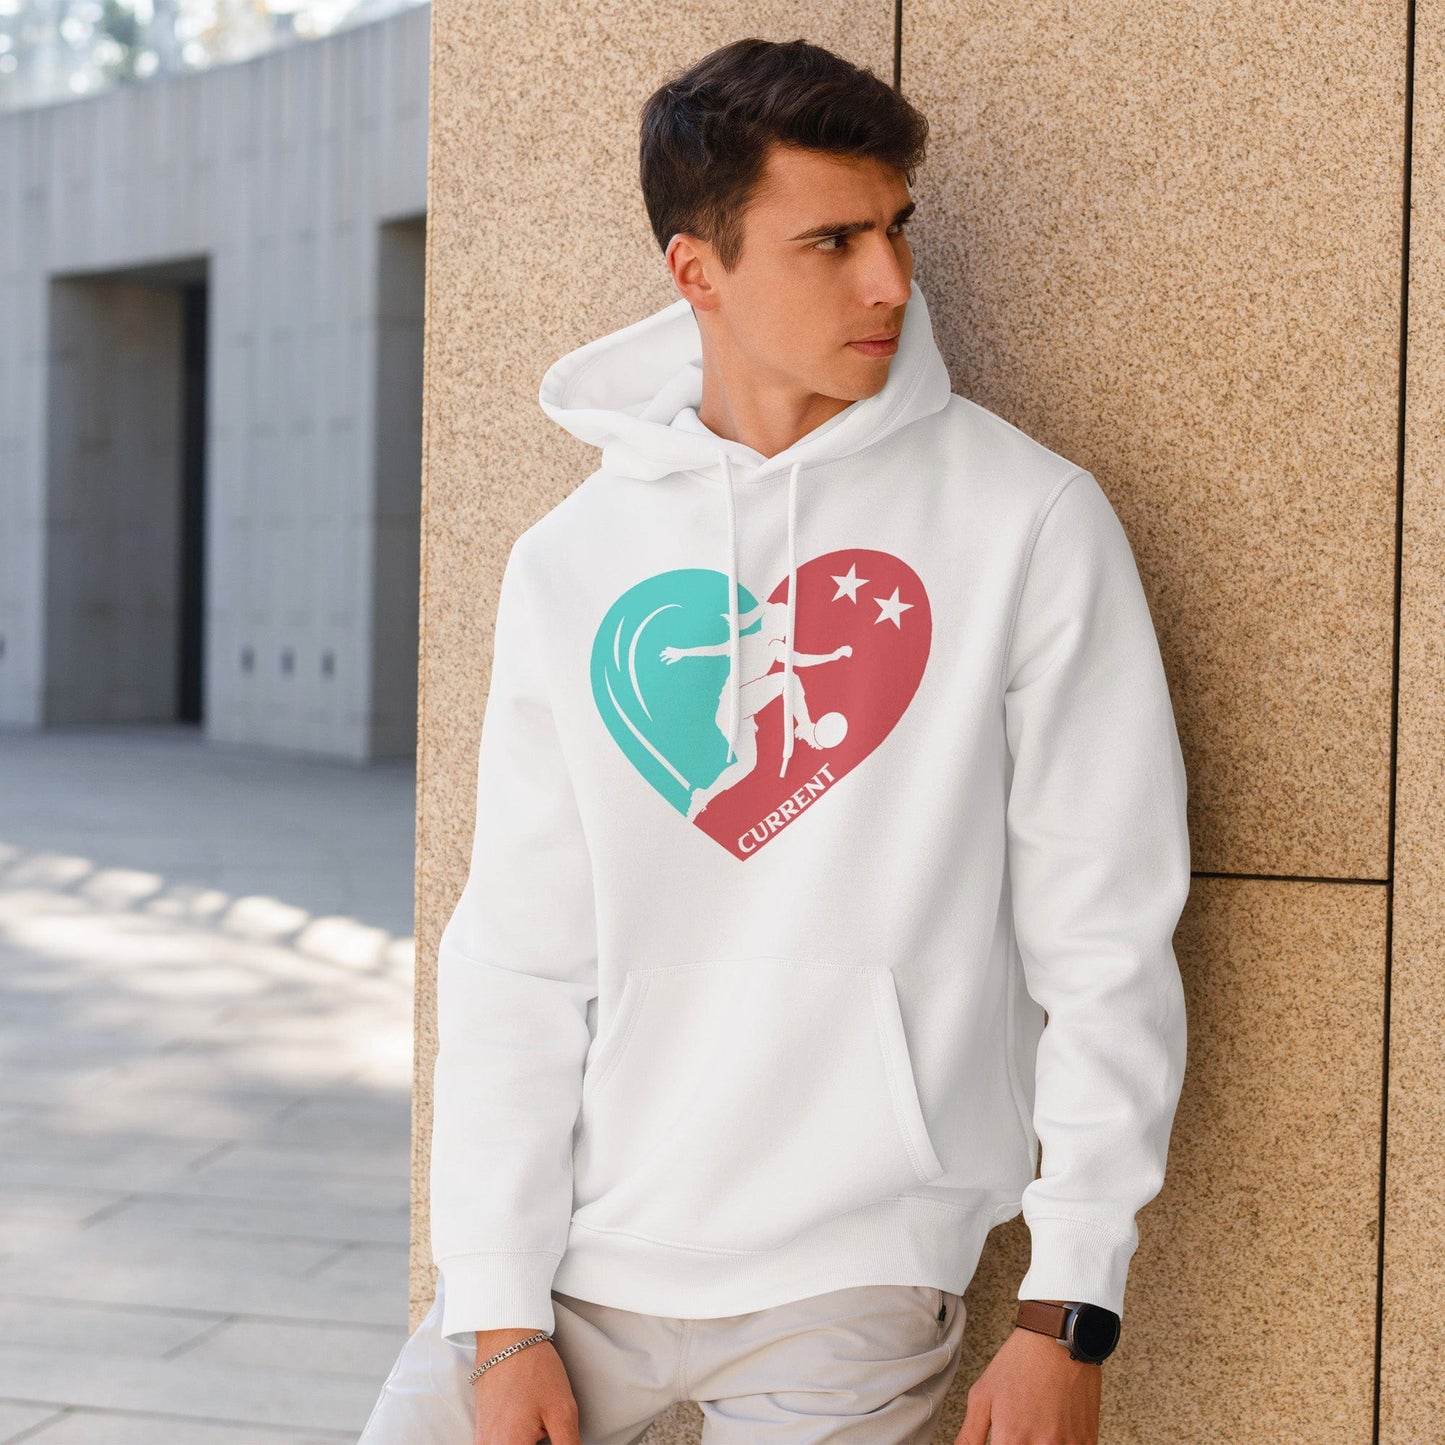 KC Swag Kansas City Current PLAYER HEART on white fleece pullover hoodie worn by male model leaning on stone wall in outdoor plaza